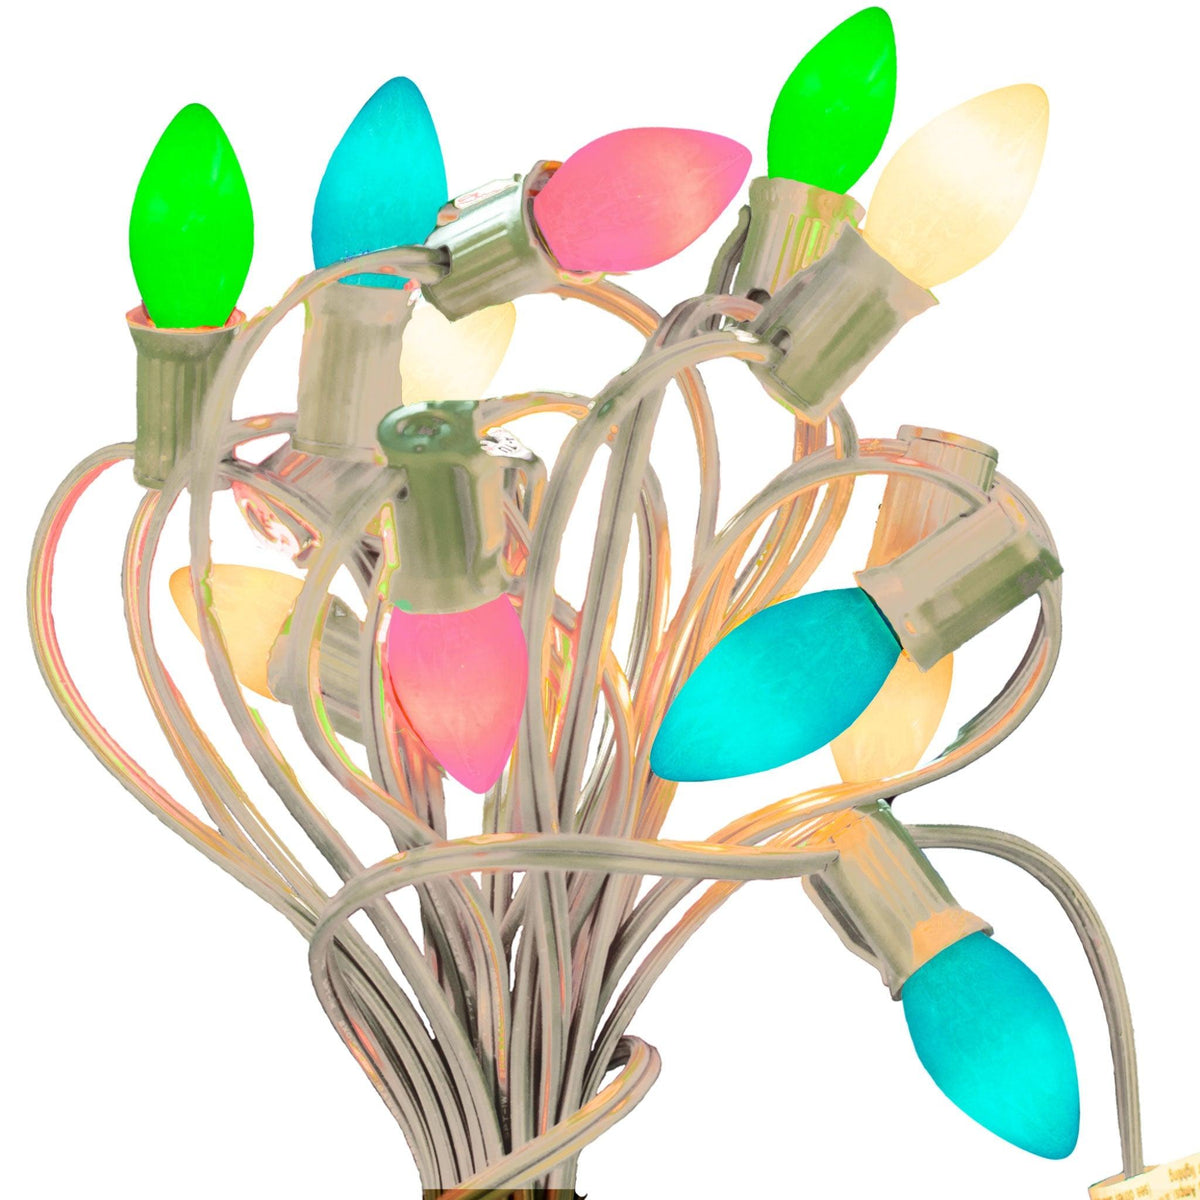 Lee Display's classic C-7 Lighting Sets in the colors for your Easter Holiday come with a 25FT Patio String Cord. On sale now at leedisplay.com